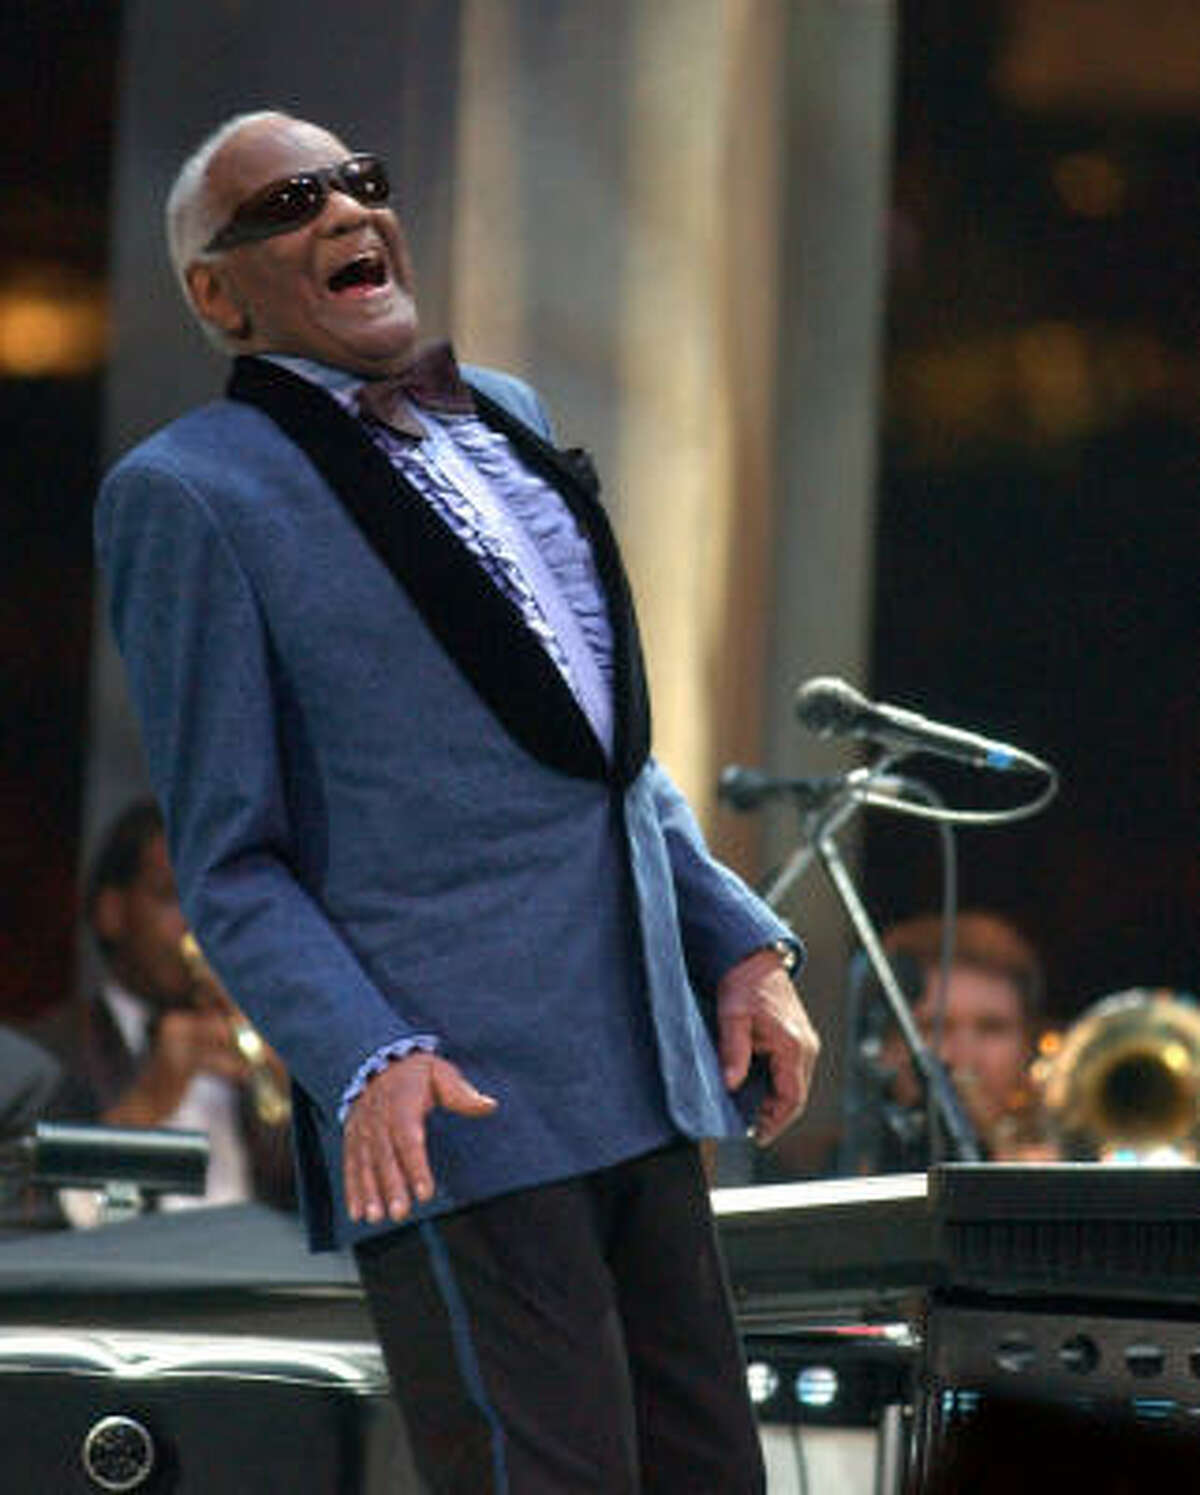 Ray Charles, shown performing at RodeoHouston in 2003, was born in Albany, Ga., in 1930. He died in 2004 at age 73.